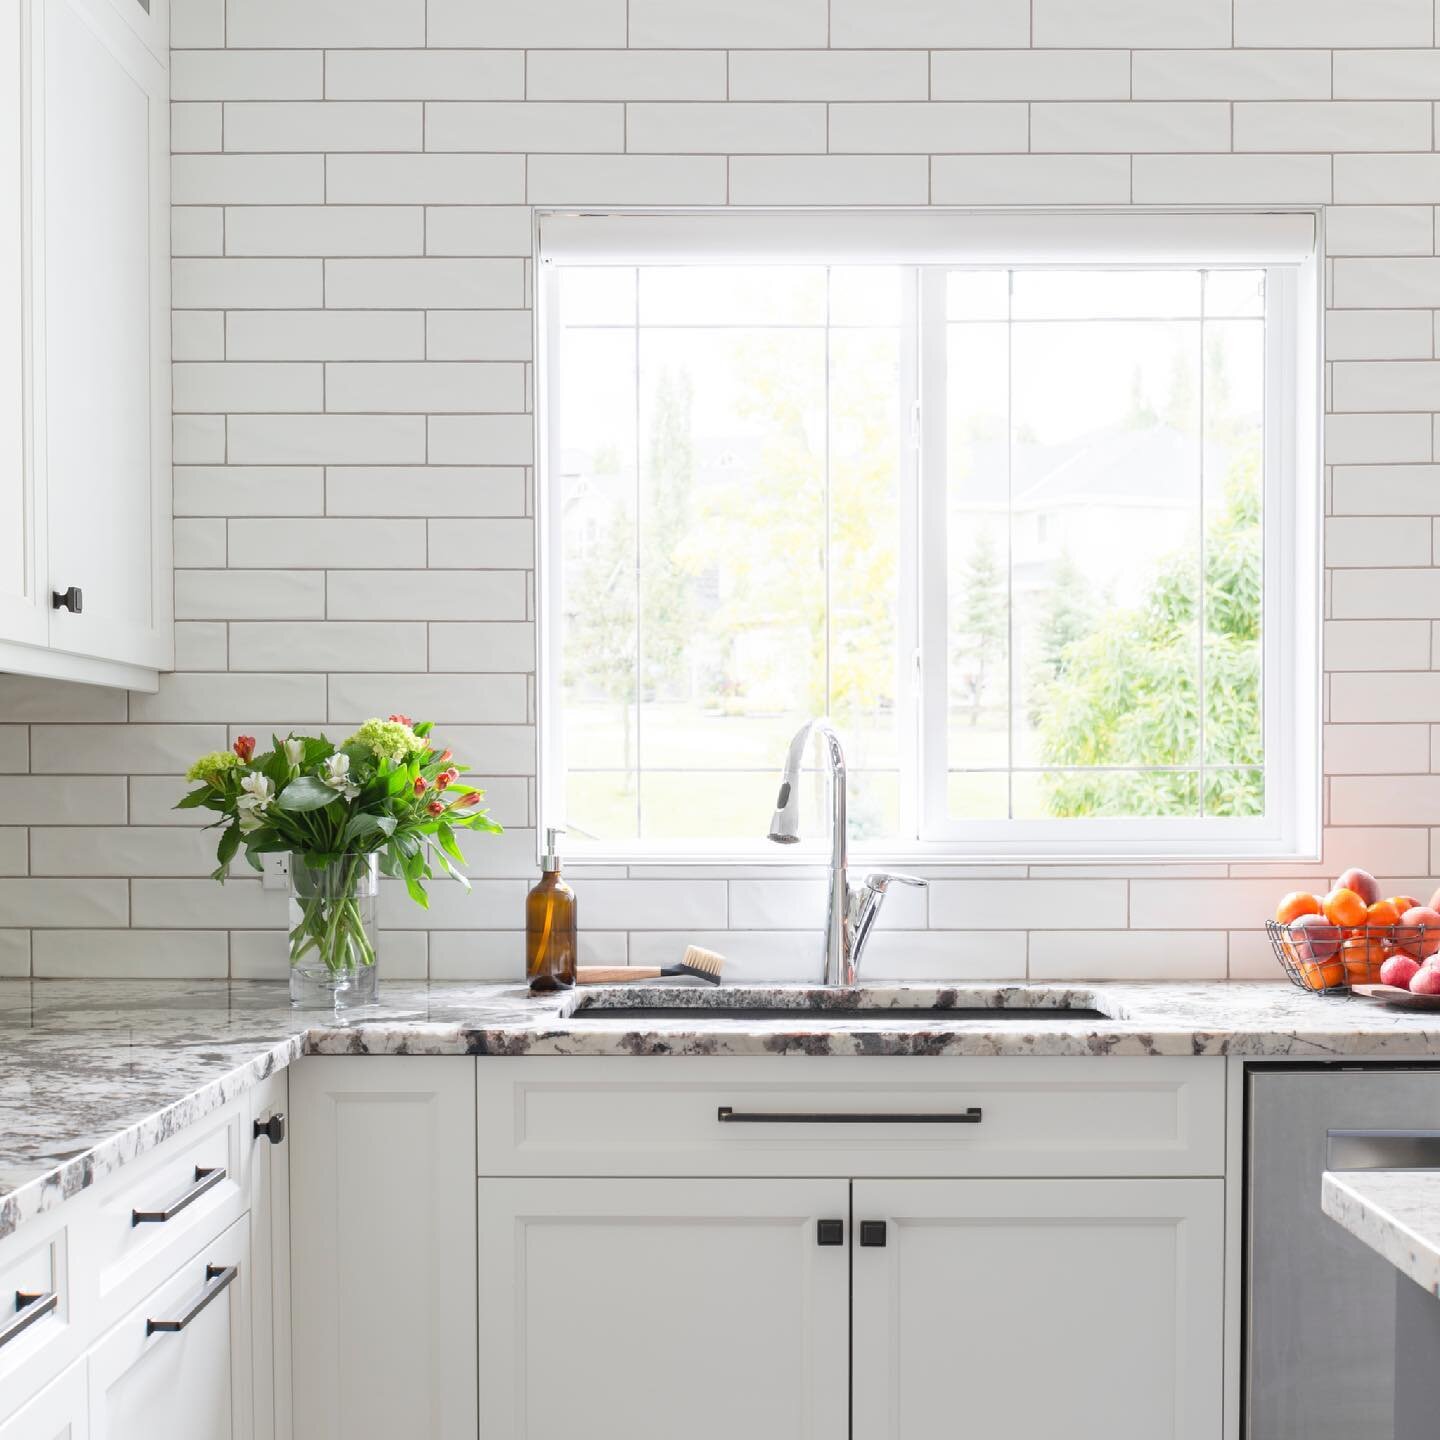 We cannot get enough of these before and after photos from the ASPEN STONE RENO!! 

Do you love this gorgeous all-white kitchen as much as we do? ✨

#LIVEWELLinahomeyoulove

&mdash;&mdash;&mdash;&mdash;&mdash;&mdash;&mdash;&mdash;&mdash;&mdash;&mdash